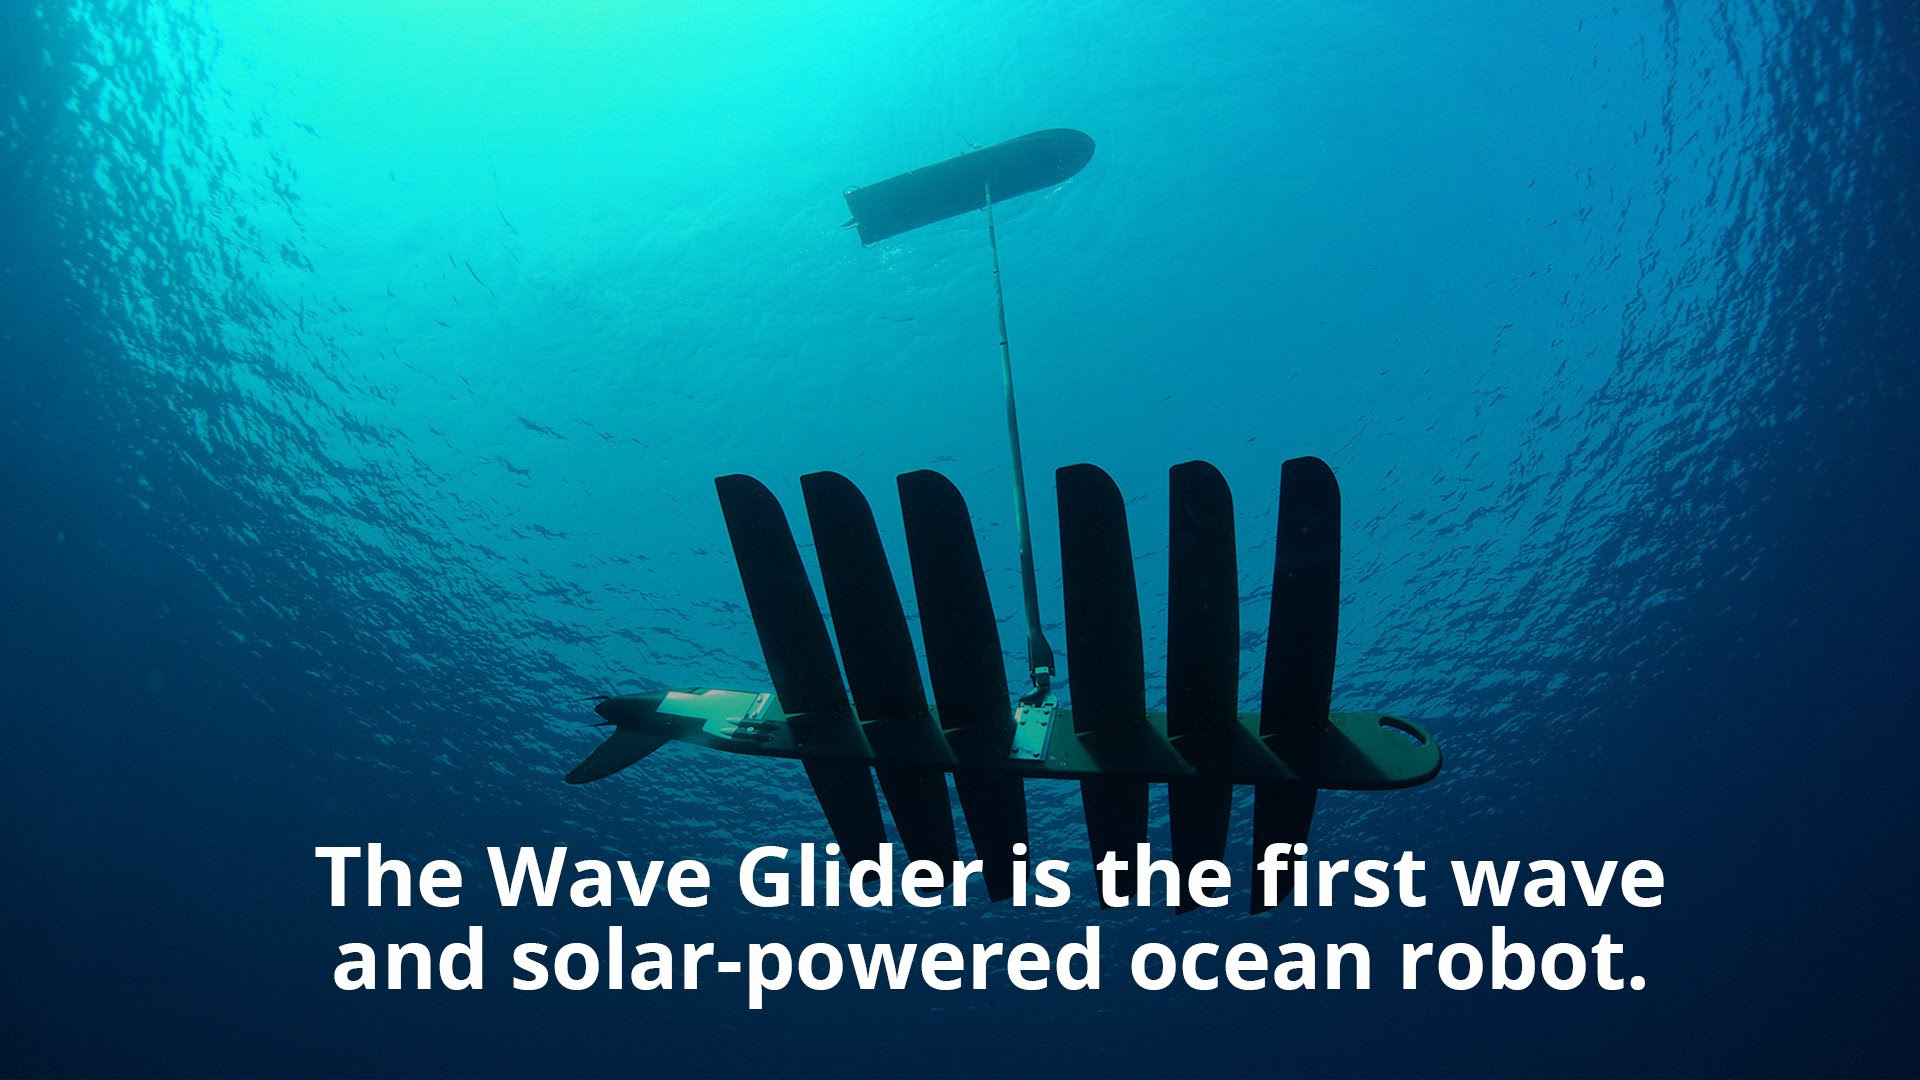 The Wave Glider is the first wave and solar-powered ocean robot